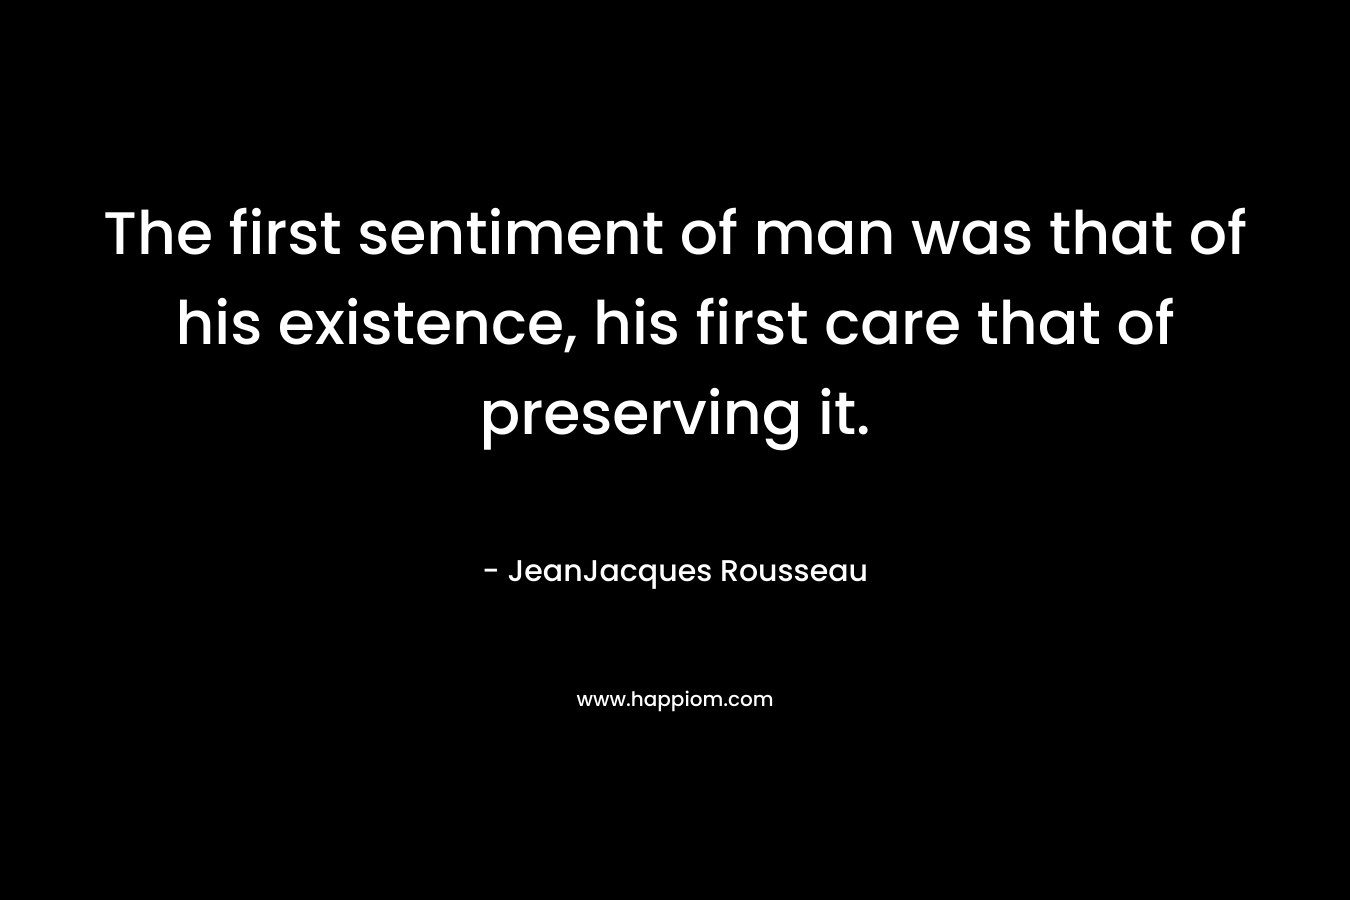 The first sentiment of man was that of his existence, his first care that of preserving it. – JeanJacques Rousseau